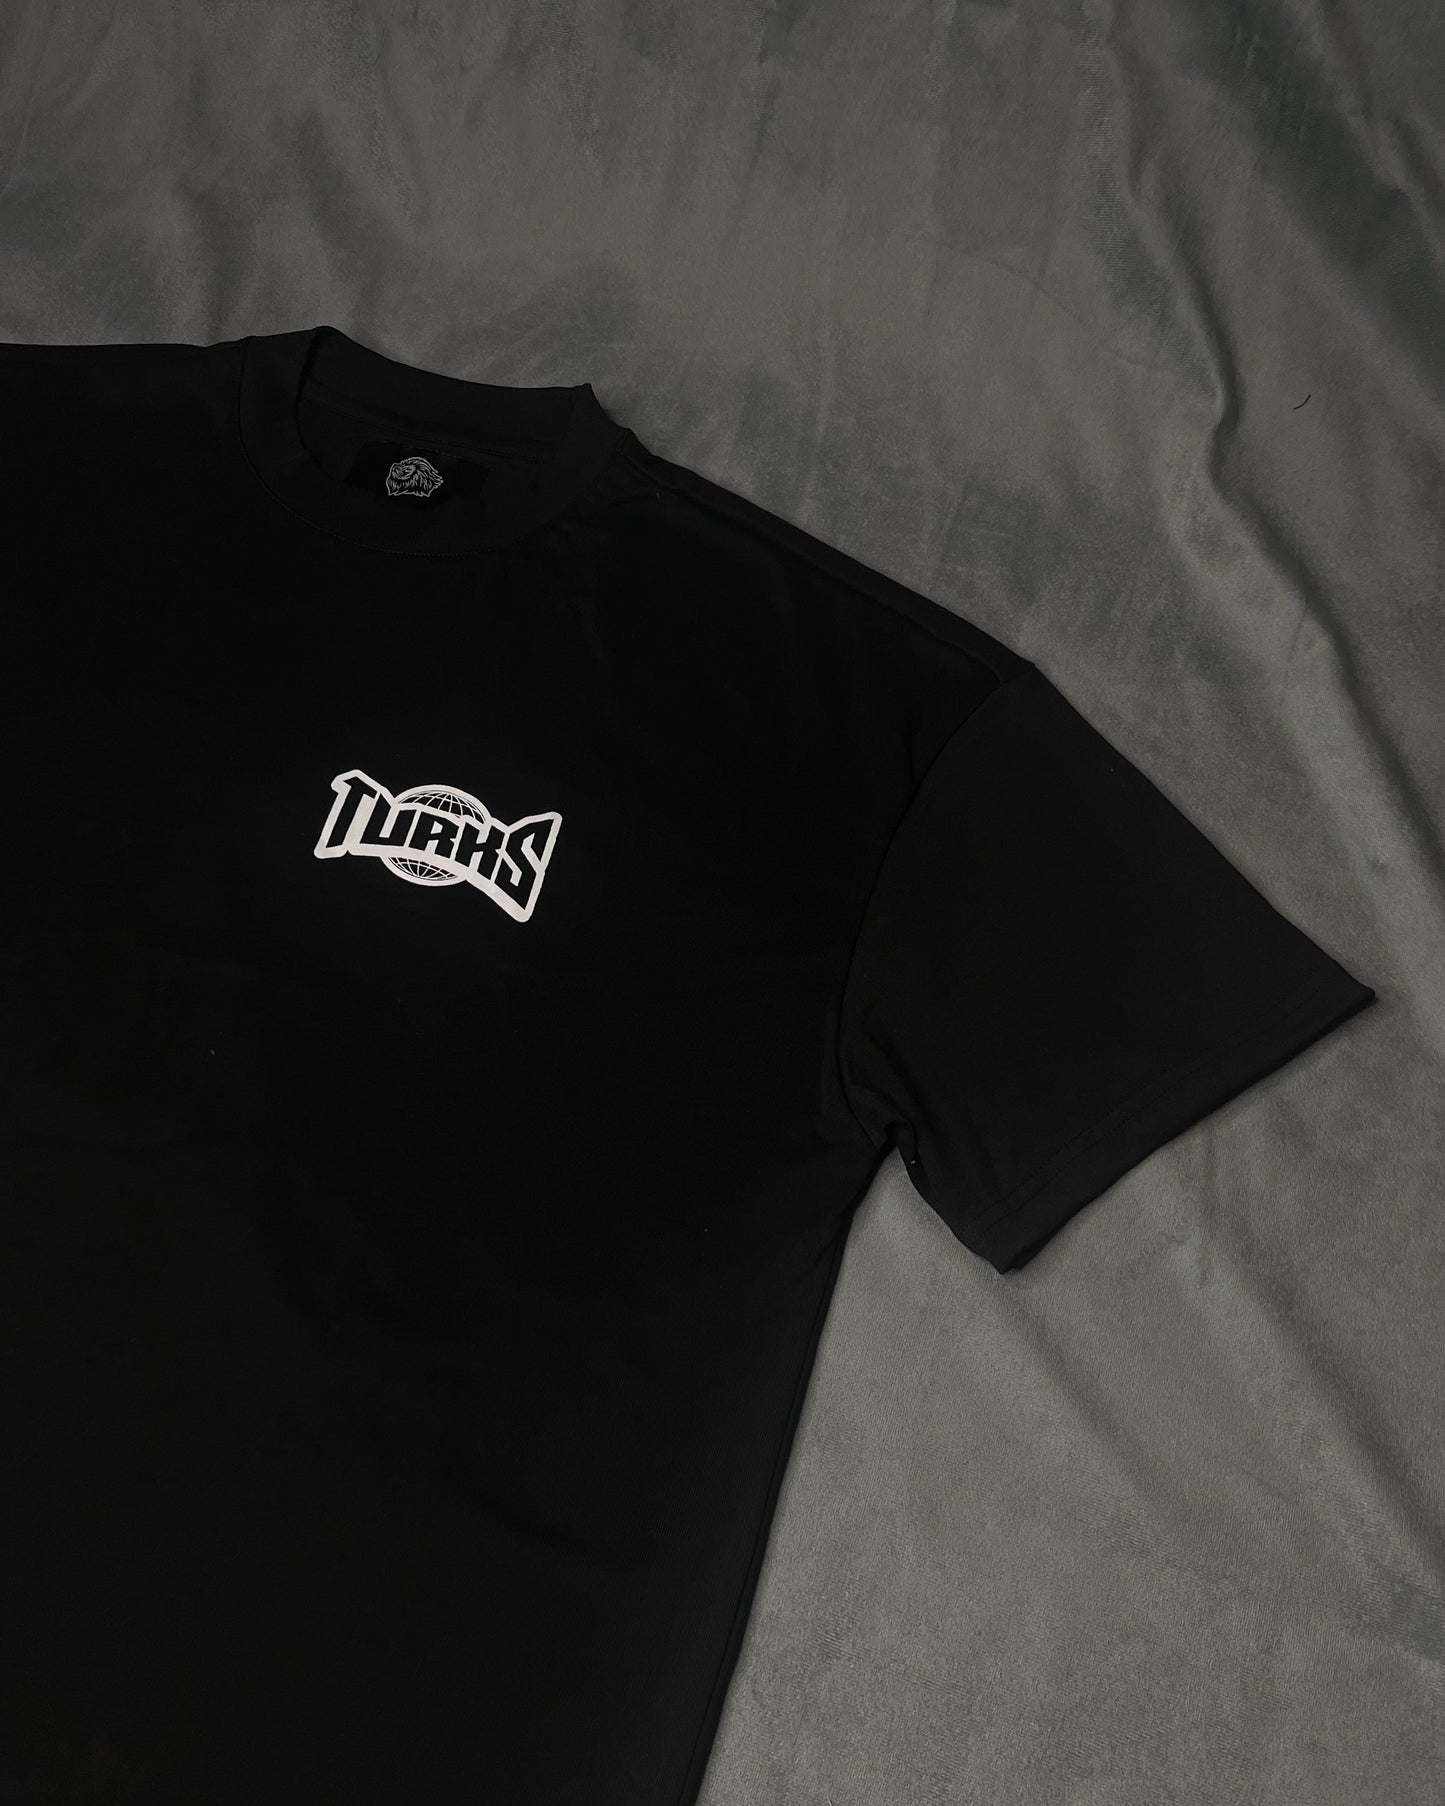 A LION'S WORLD TEE IN BLACK